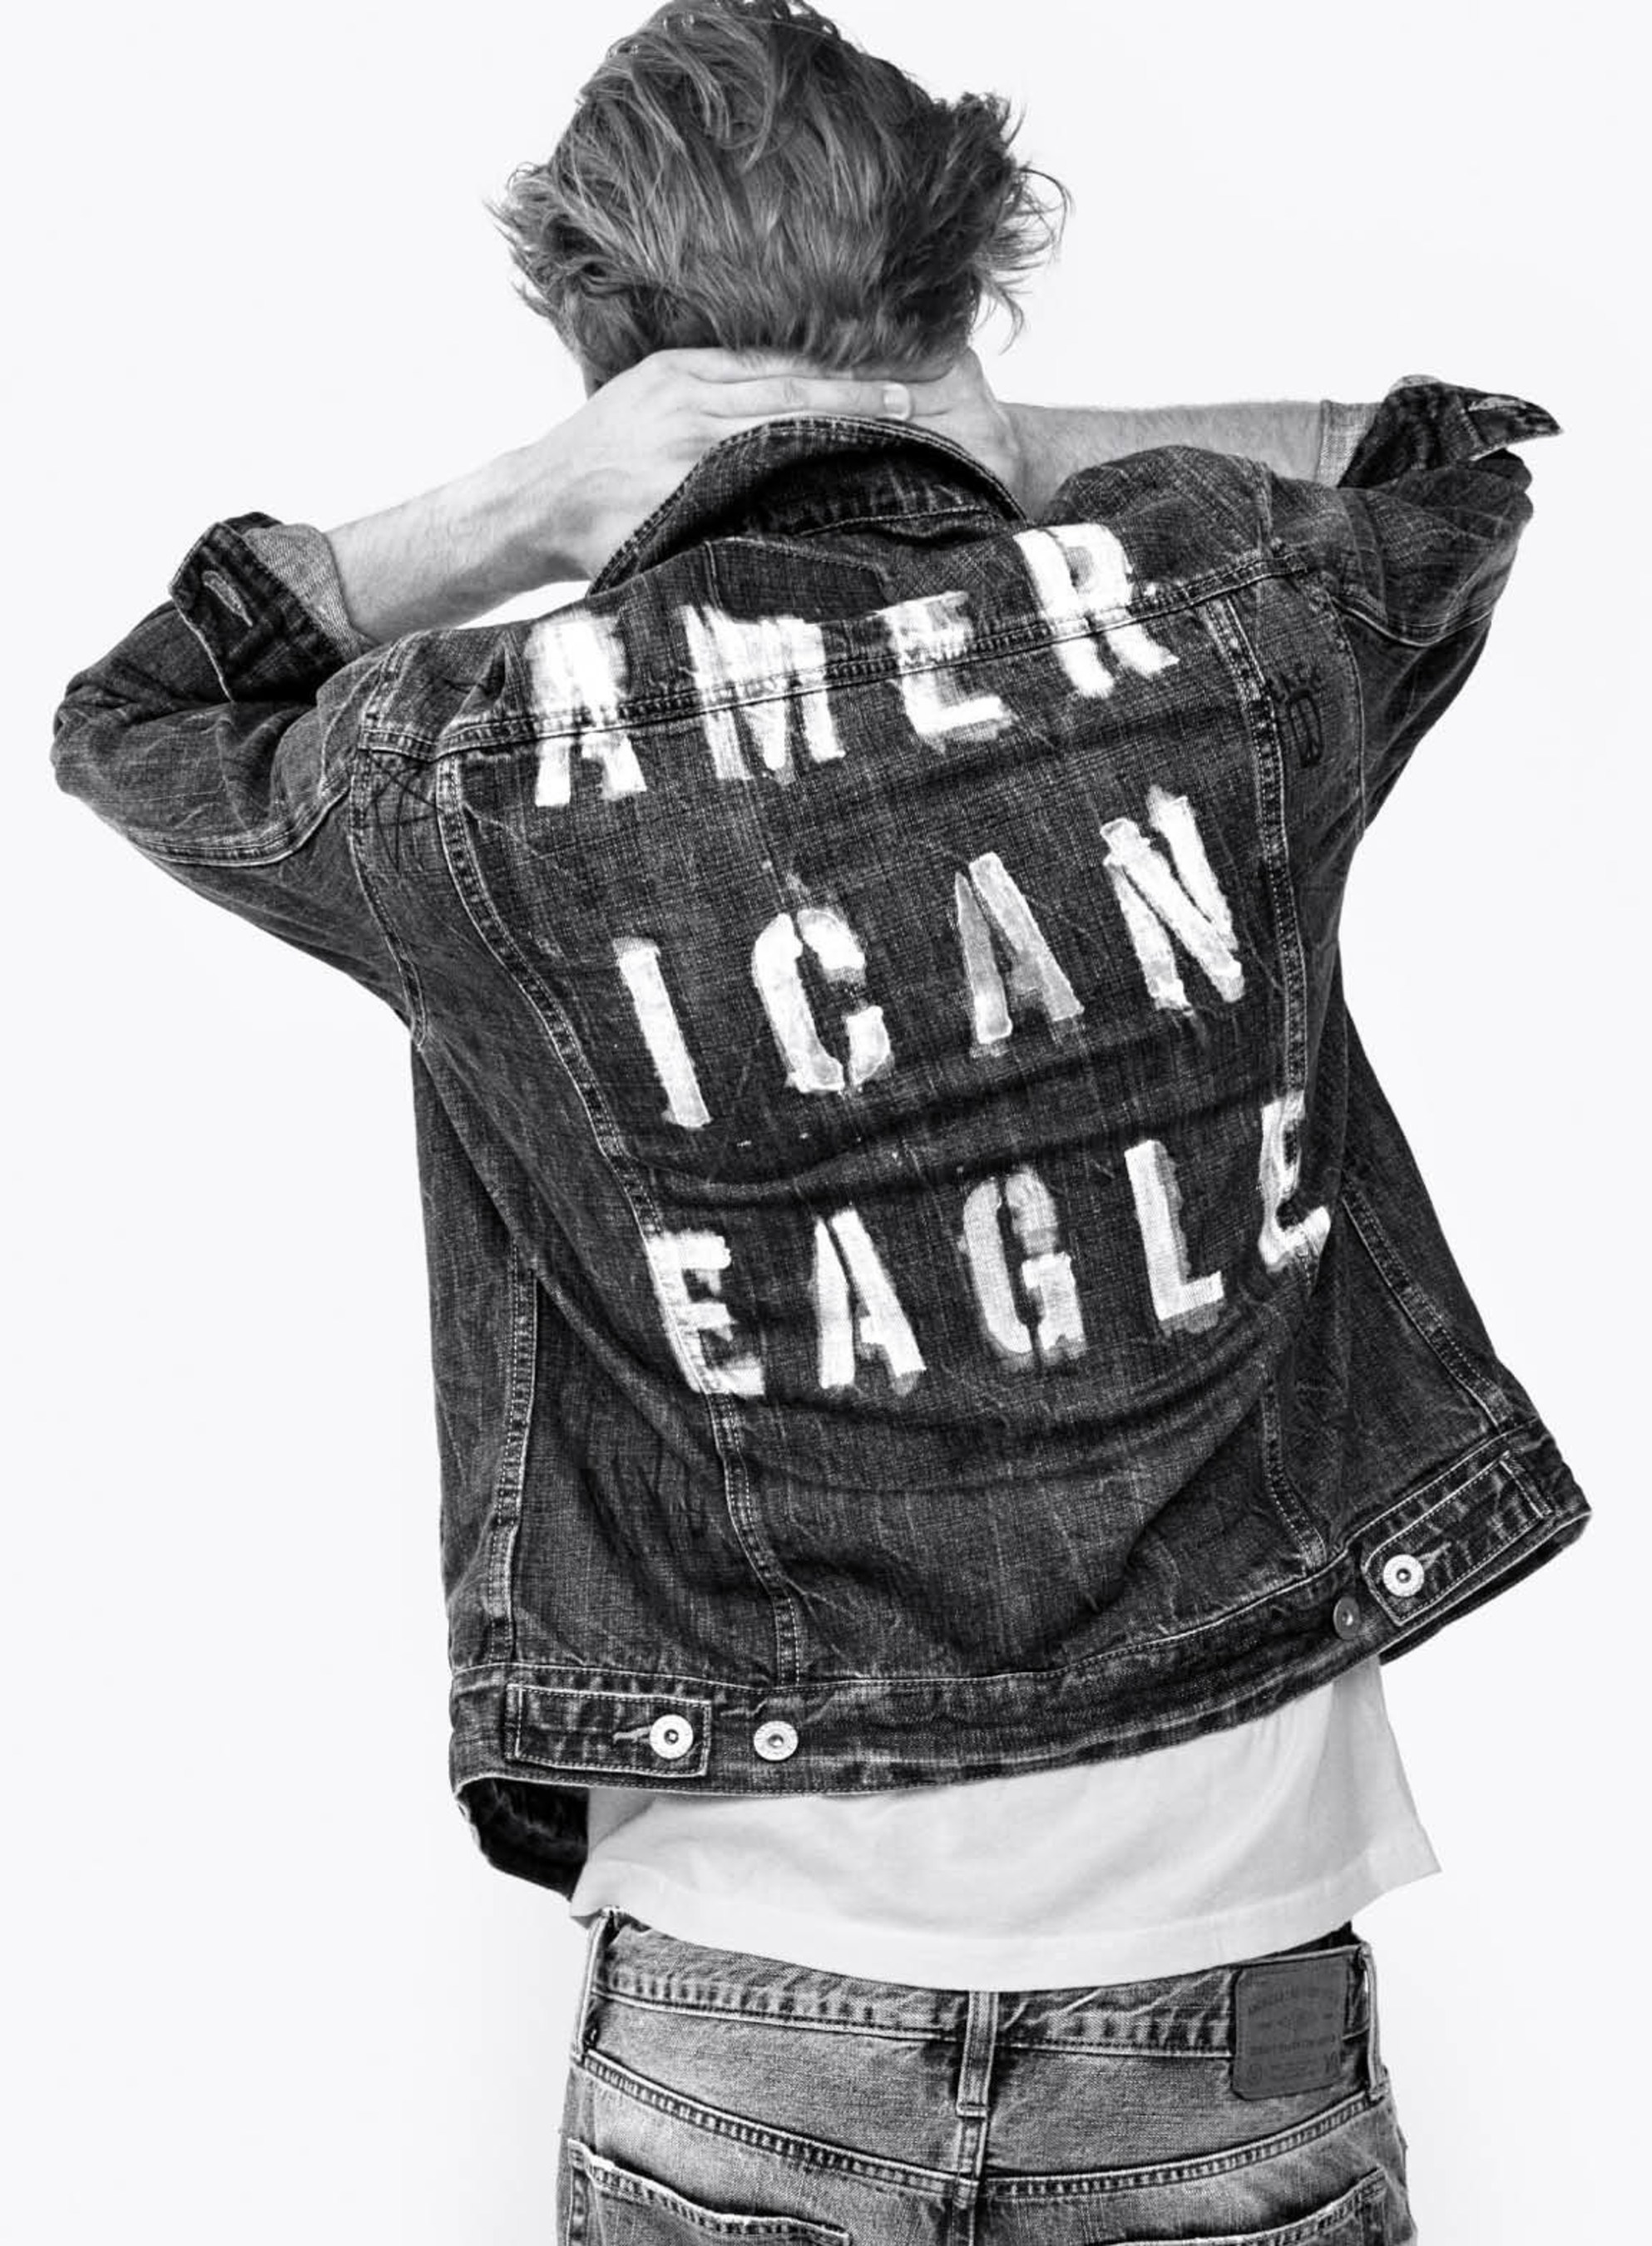 AMERICAN EAGLE OUTFITTERS EMPOWERS YOUNG AMERICA WITH #WeAllCan FALL CAMPAIGN